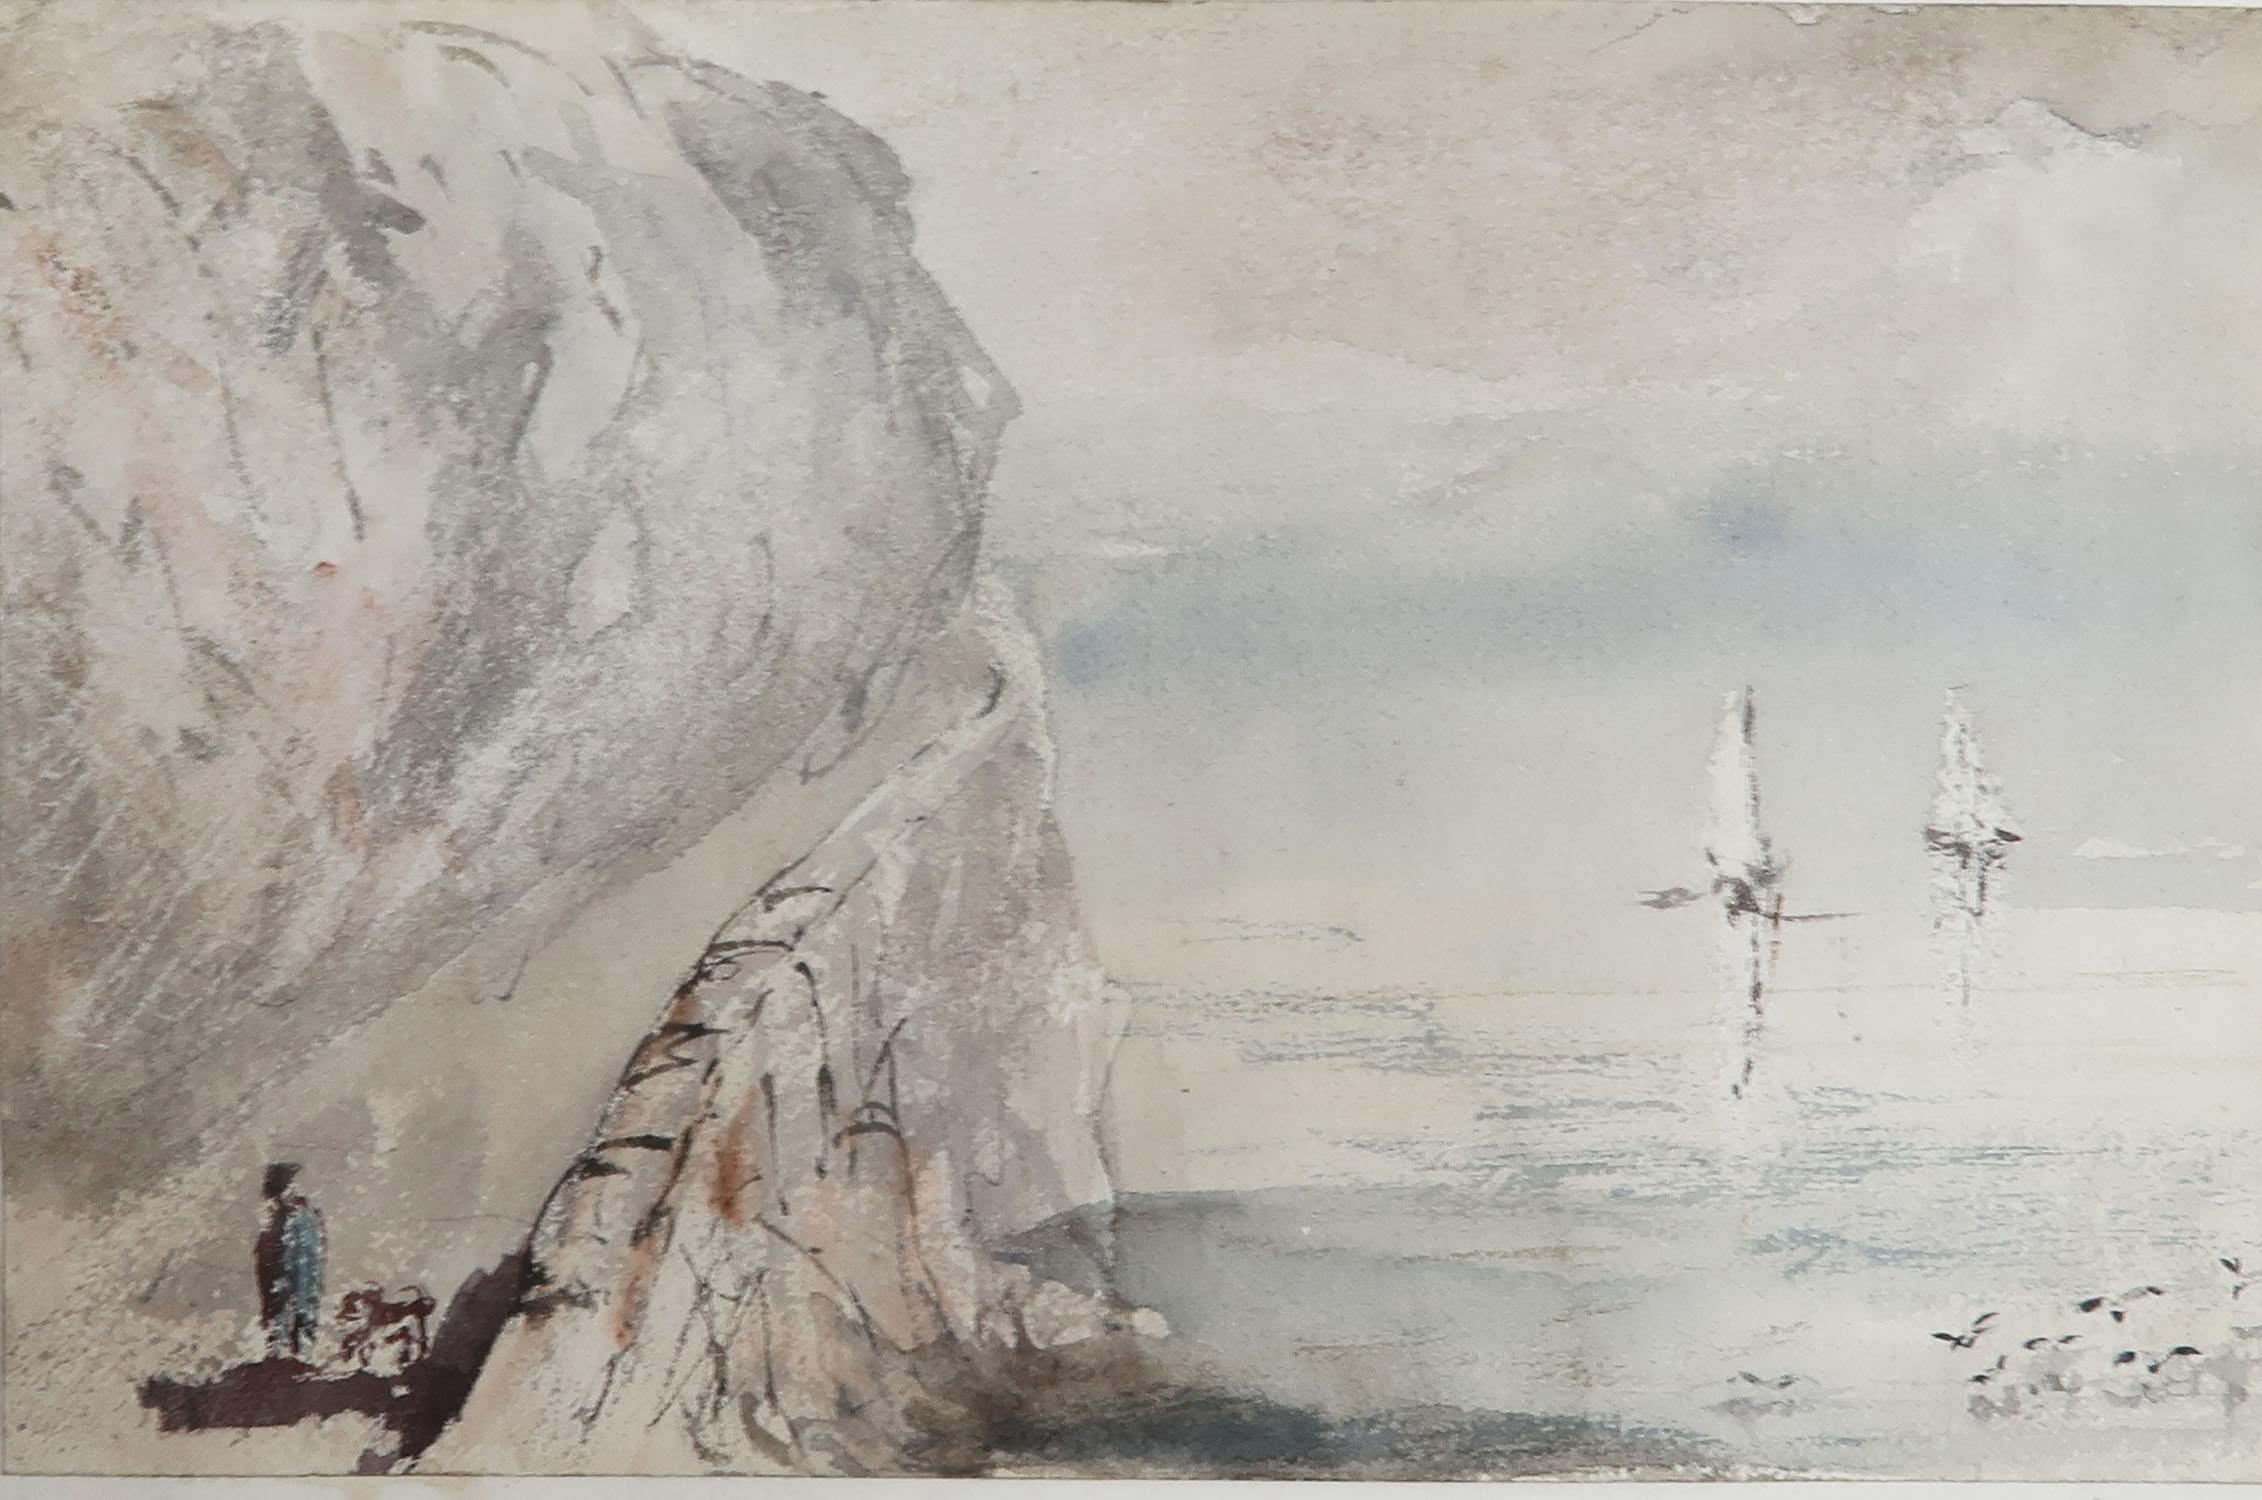 A beautiful watercolor of the North Wales coast 

Fabulous quality. Lovely colours. Not faded at all.

On paper applied to paper

Unsigned

Unframed

*Robert Hindmarsh Grundy. 1816-1865. Examples of his work in The Lady Lever Gallery and